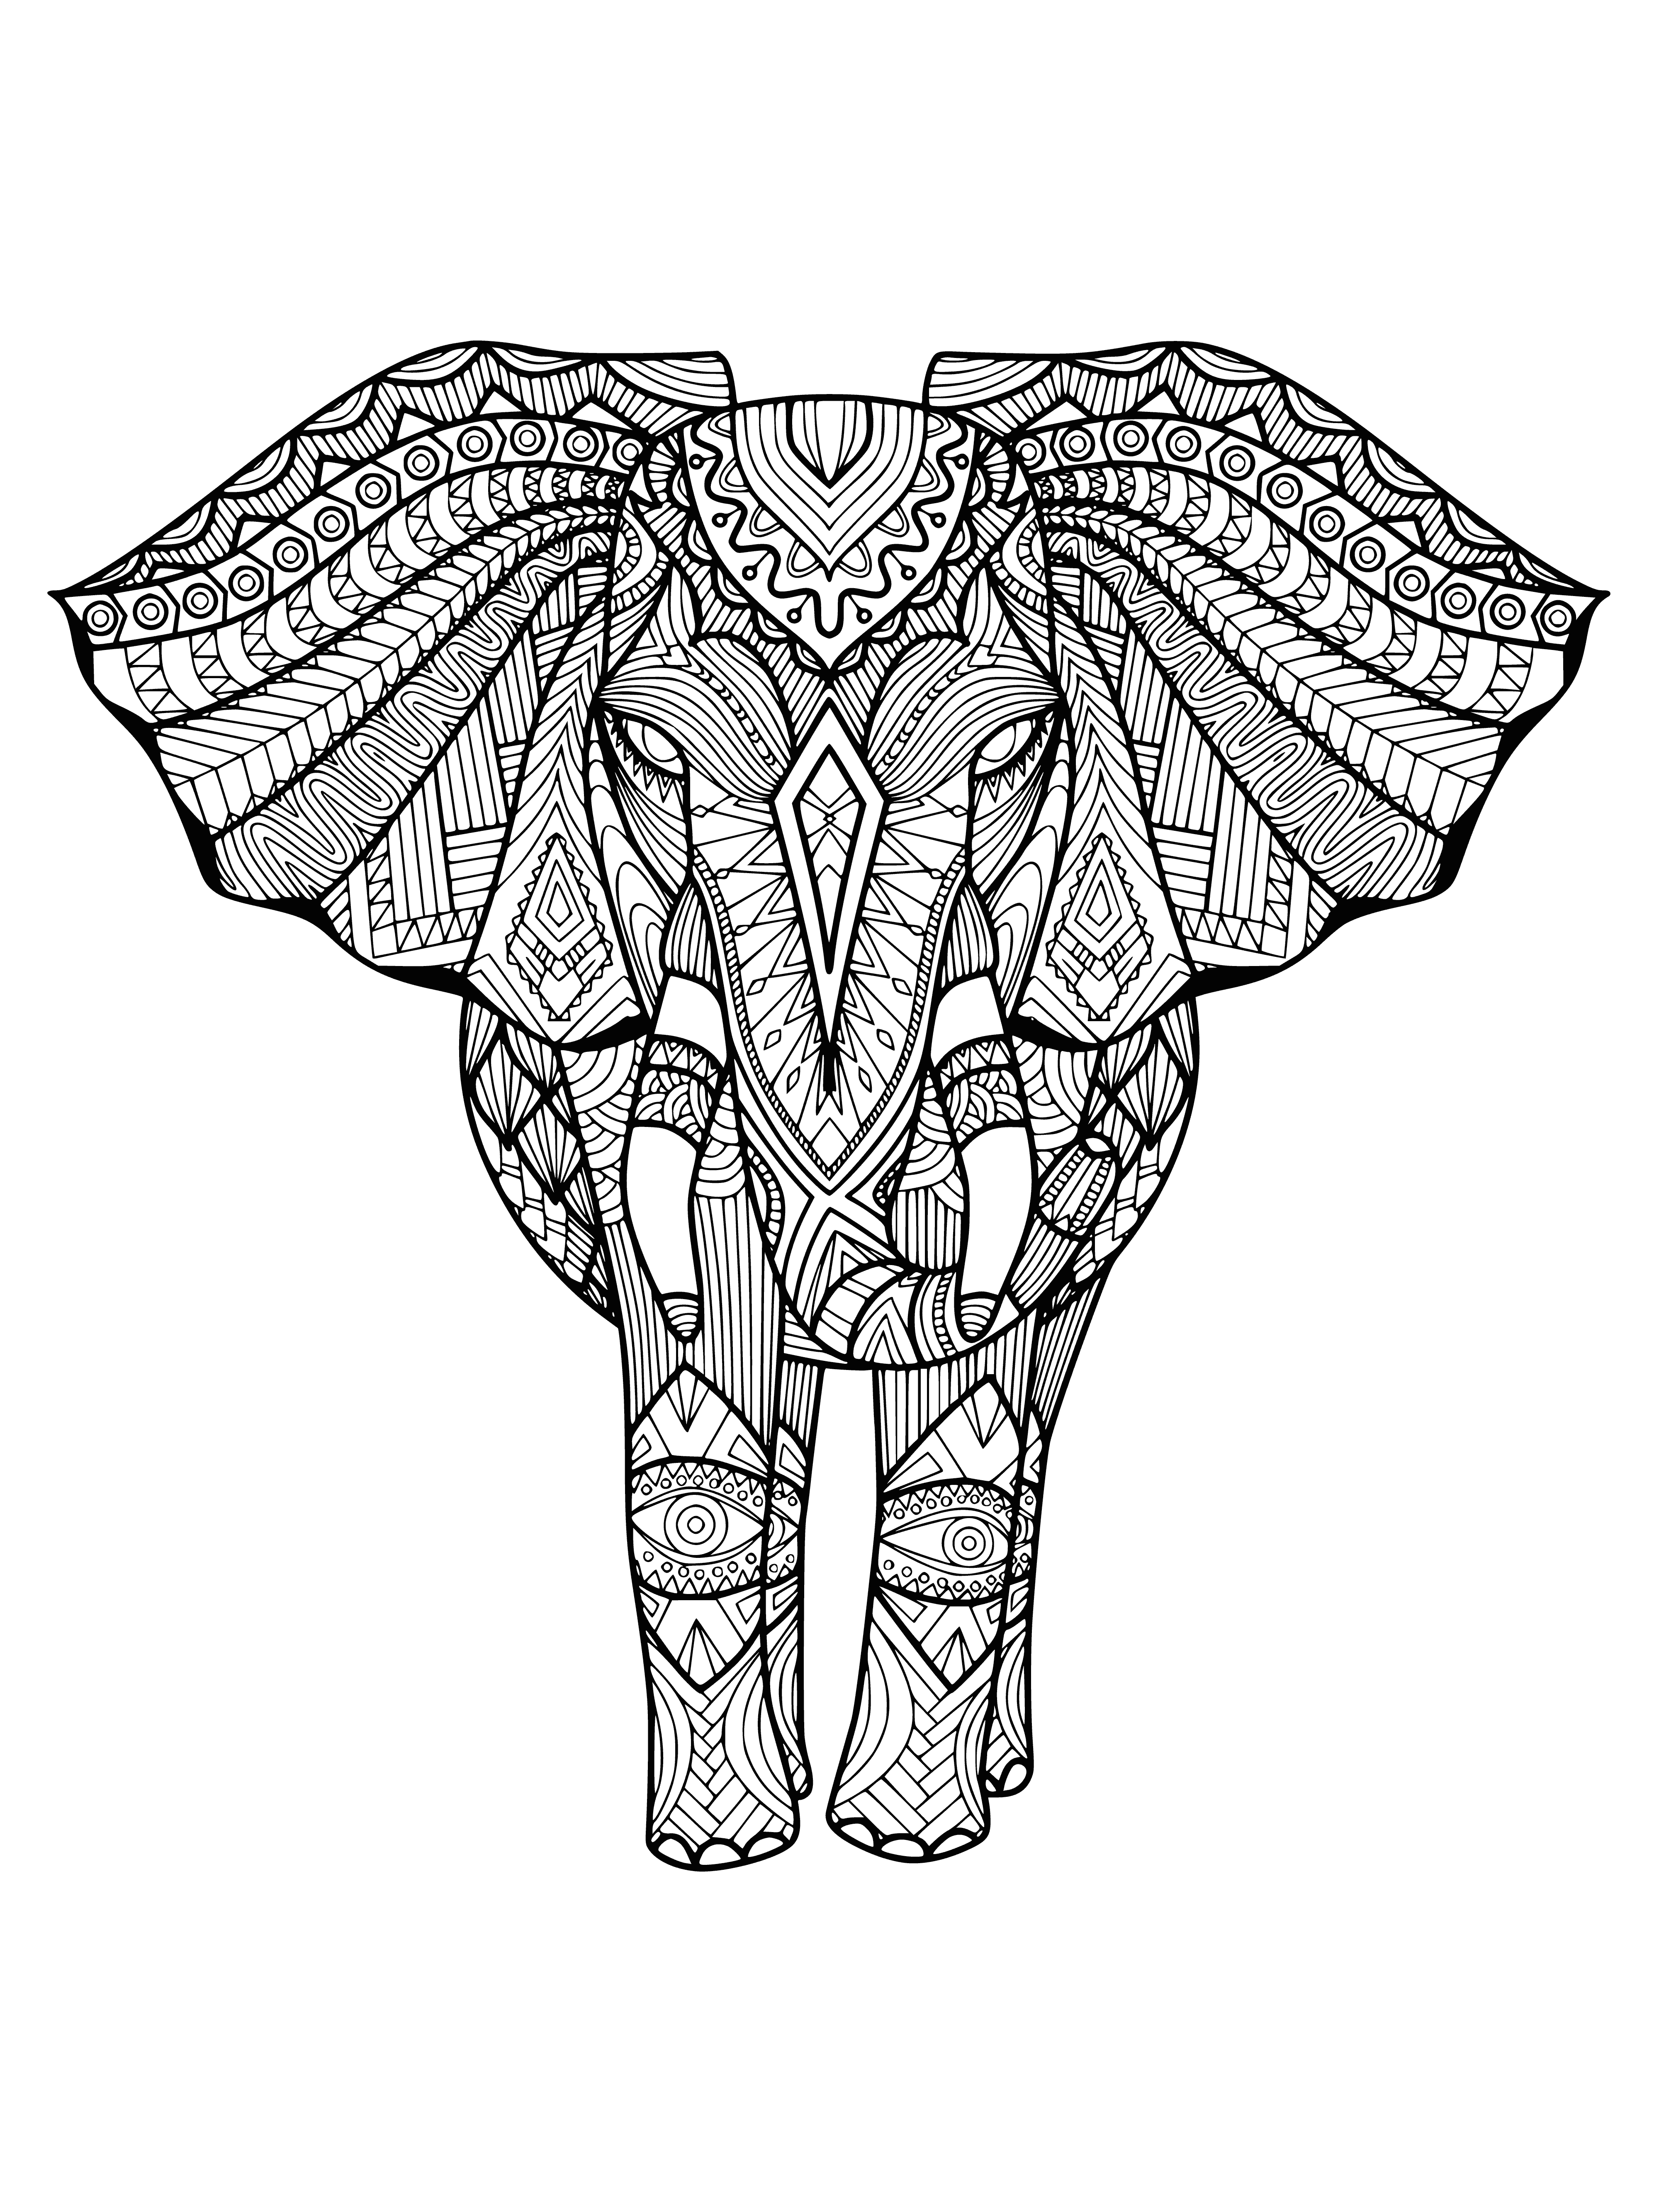 coloring page: A elephant coloring page: gray w/ white spots, long trunk, big ears, standing on a patch of grass. #creativeKids